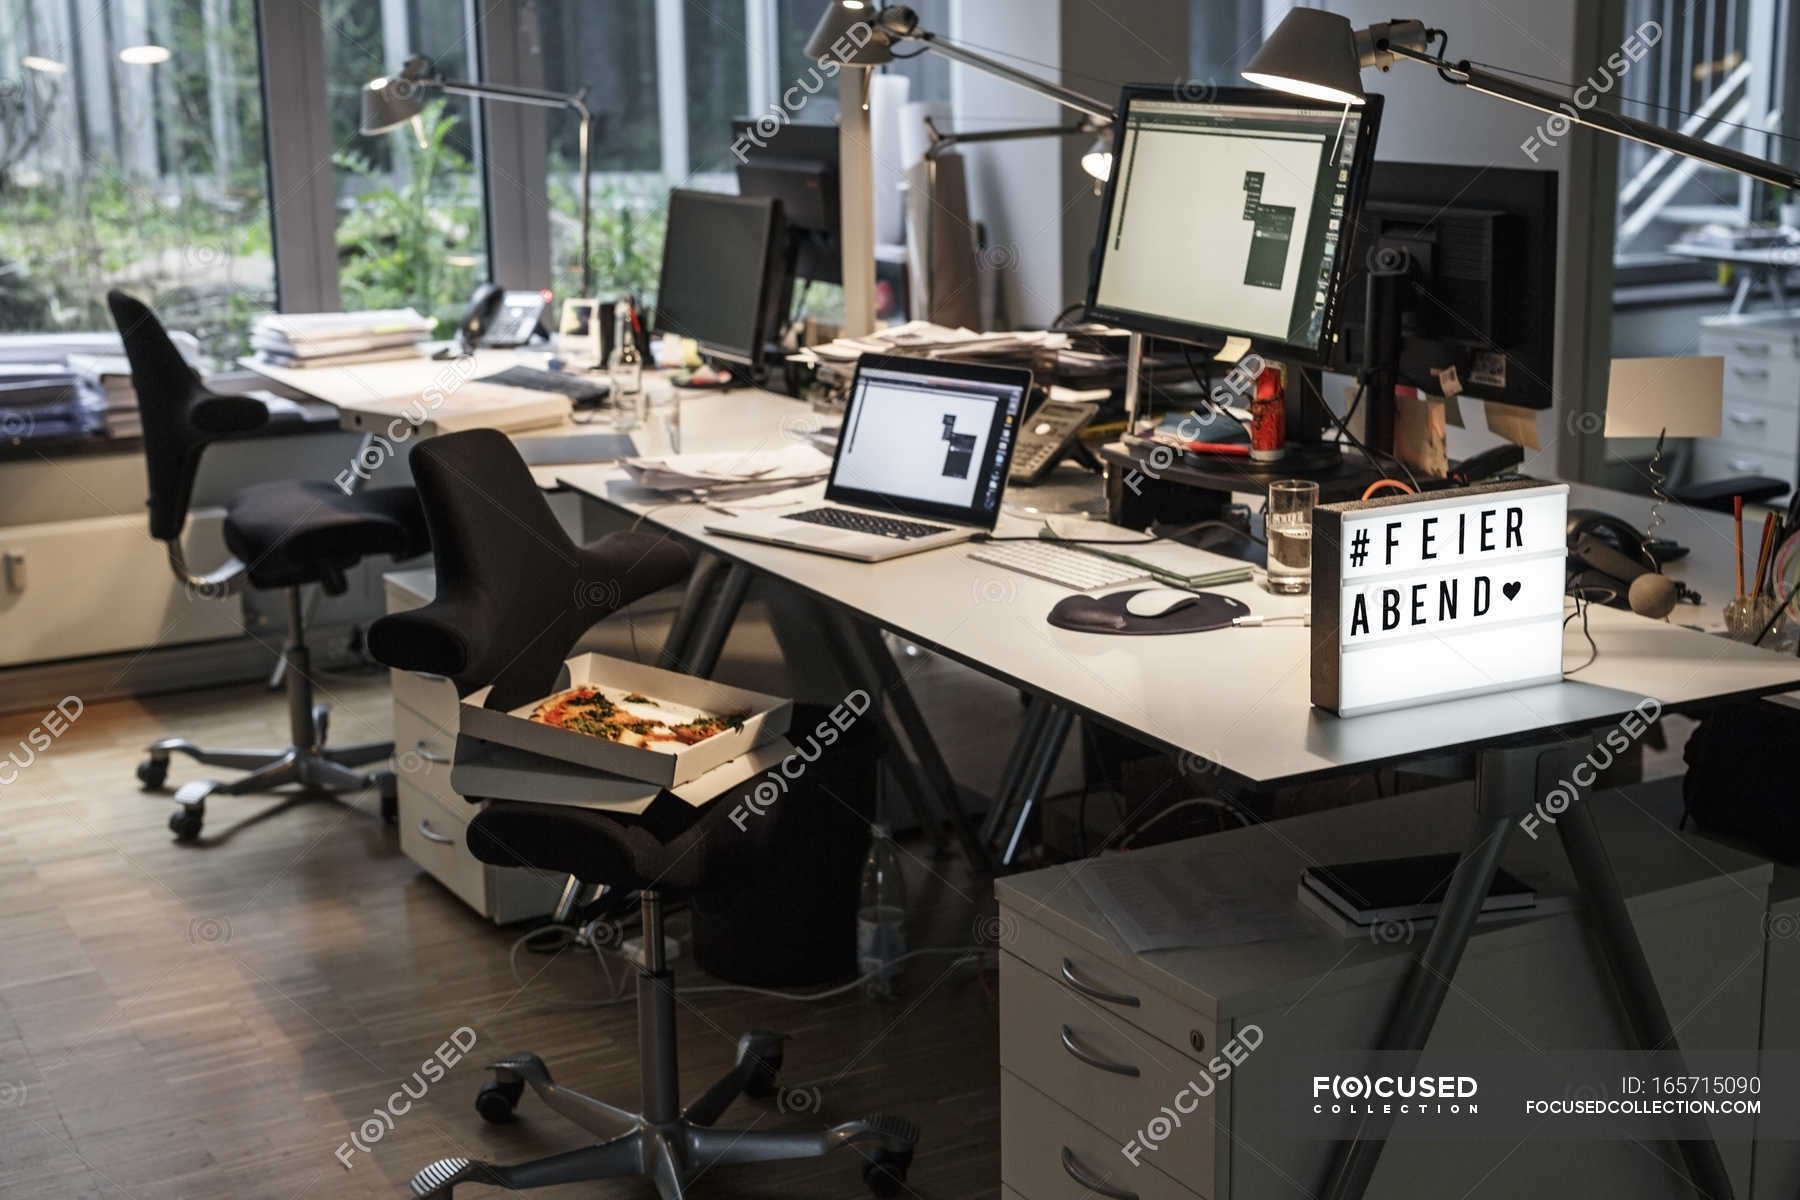 Closing time sign on desk — nobody, technology - Stock Photo | #165715090